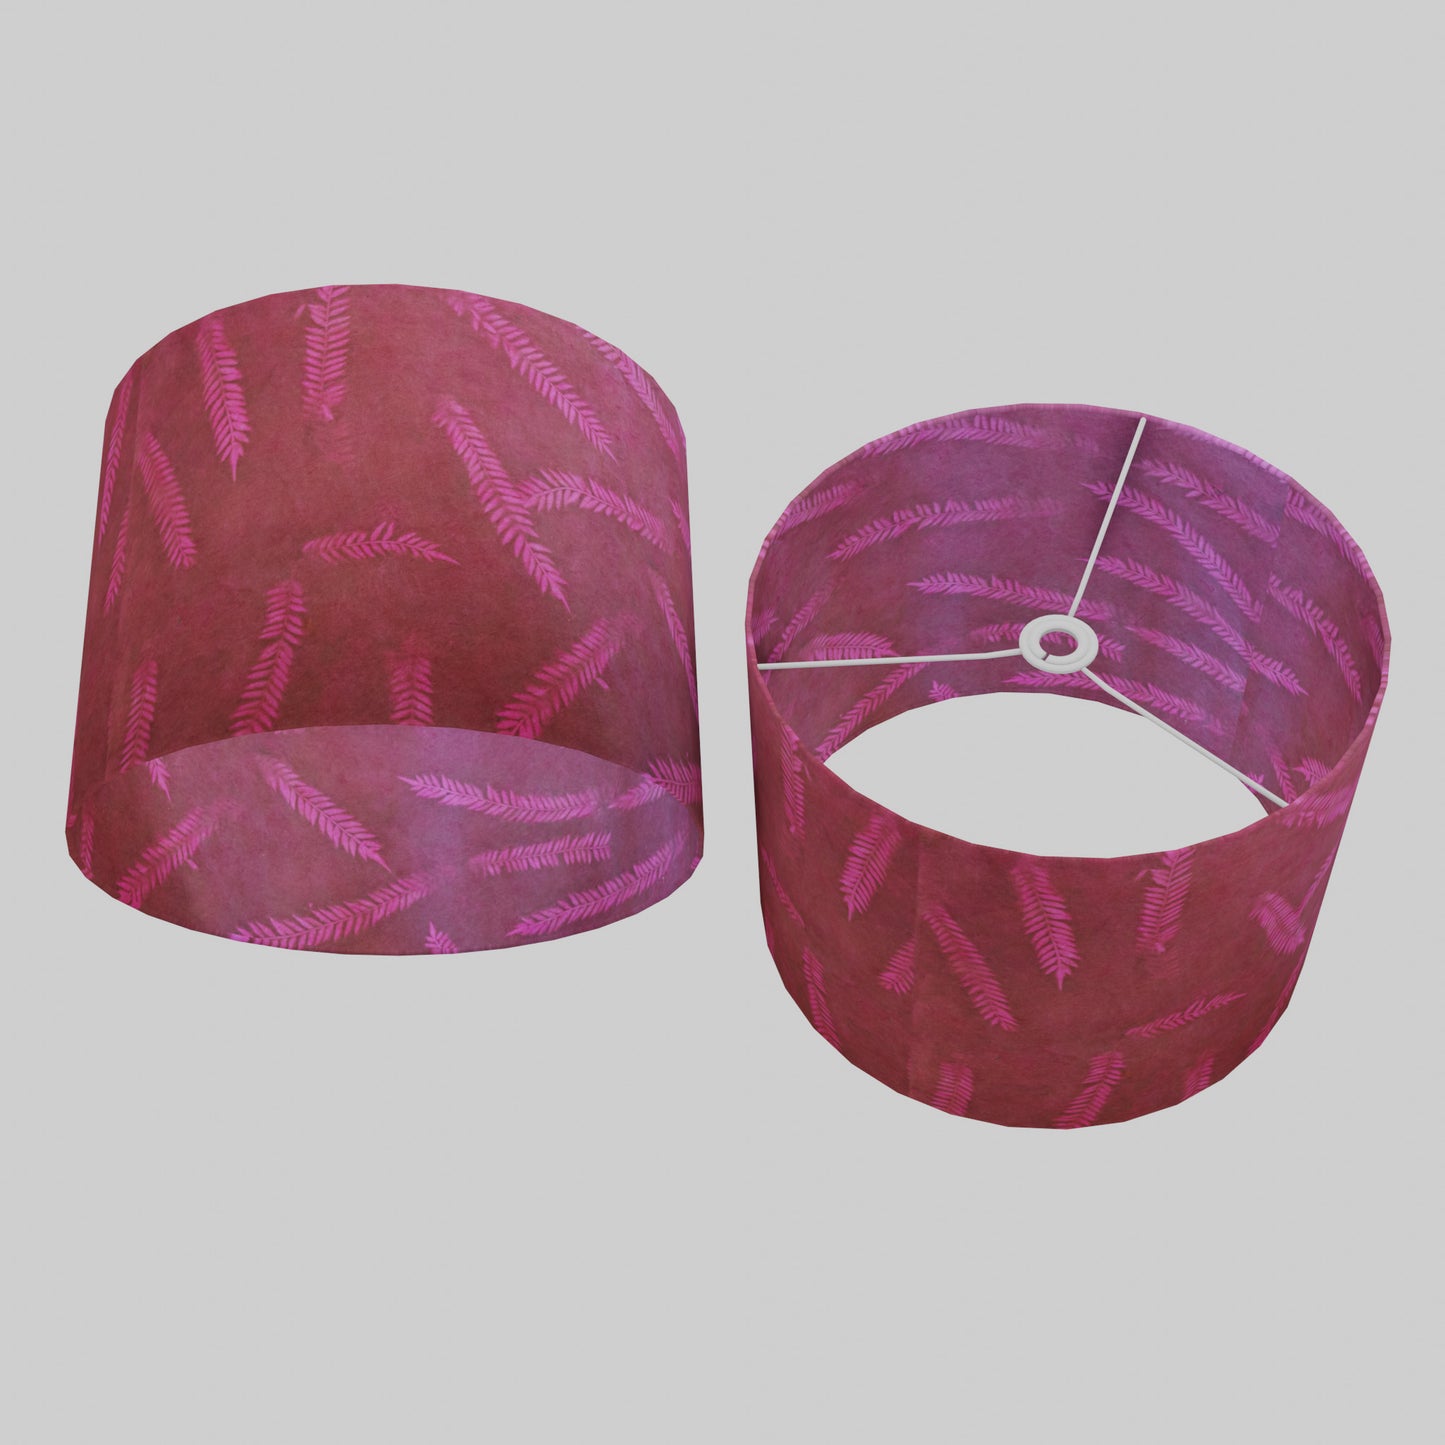 Drum Lamp Shade - P25 - Resistance Dyed Pink Fern, 40cm(d) x 30cm(h)